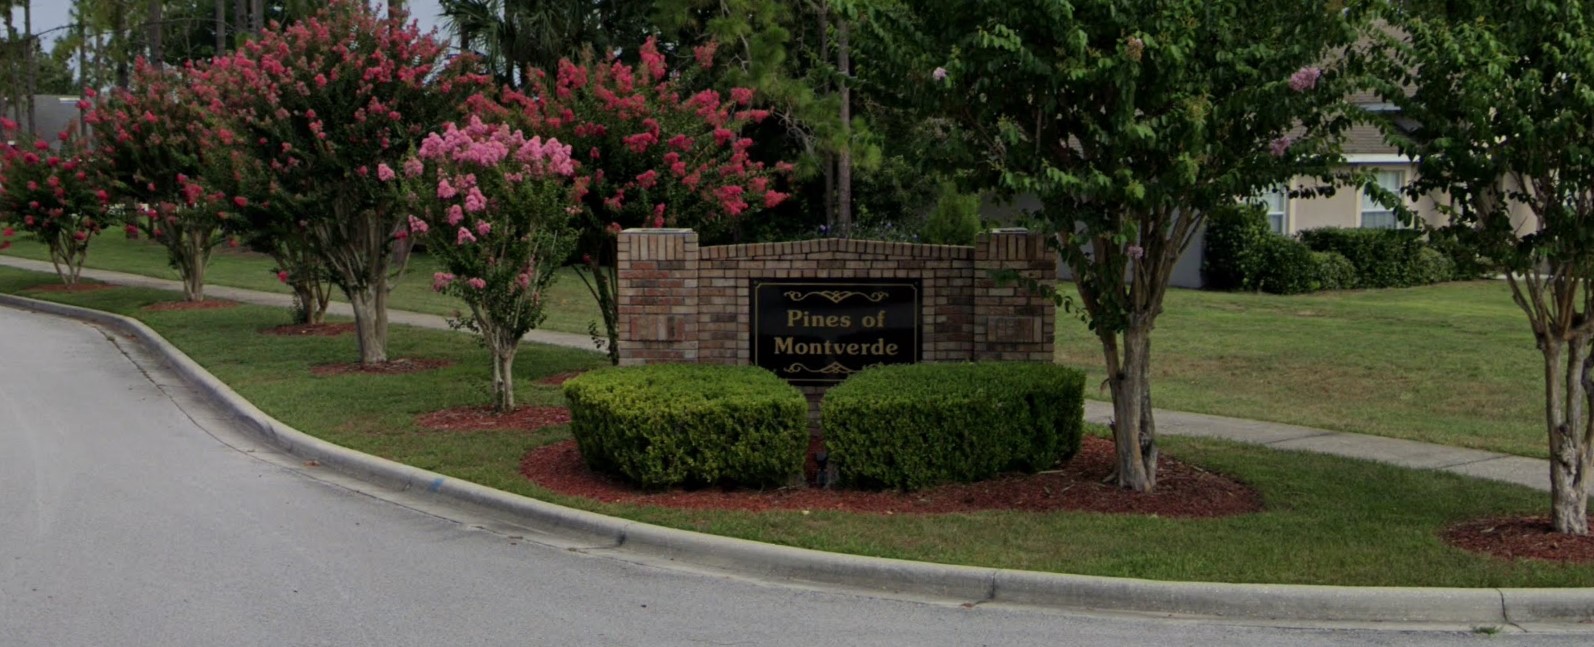 pines-front-sign2